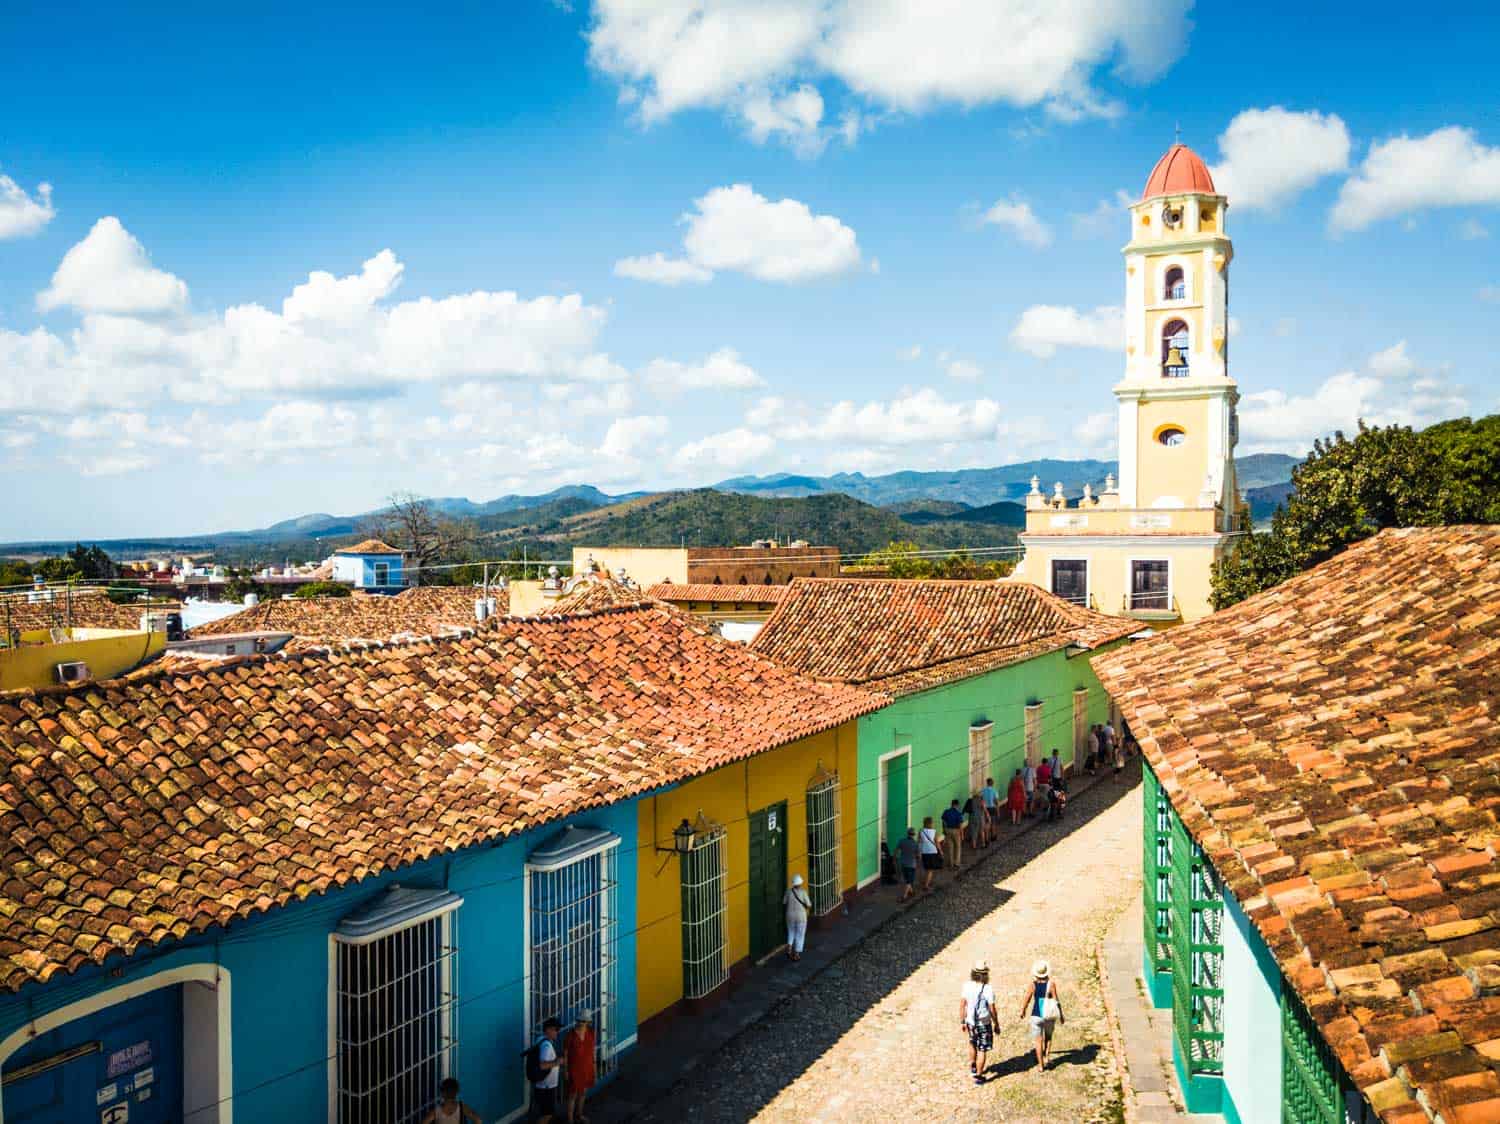 Trinidad Cuba, here's what to see and do in Trinidad in two days.